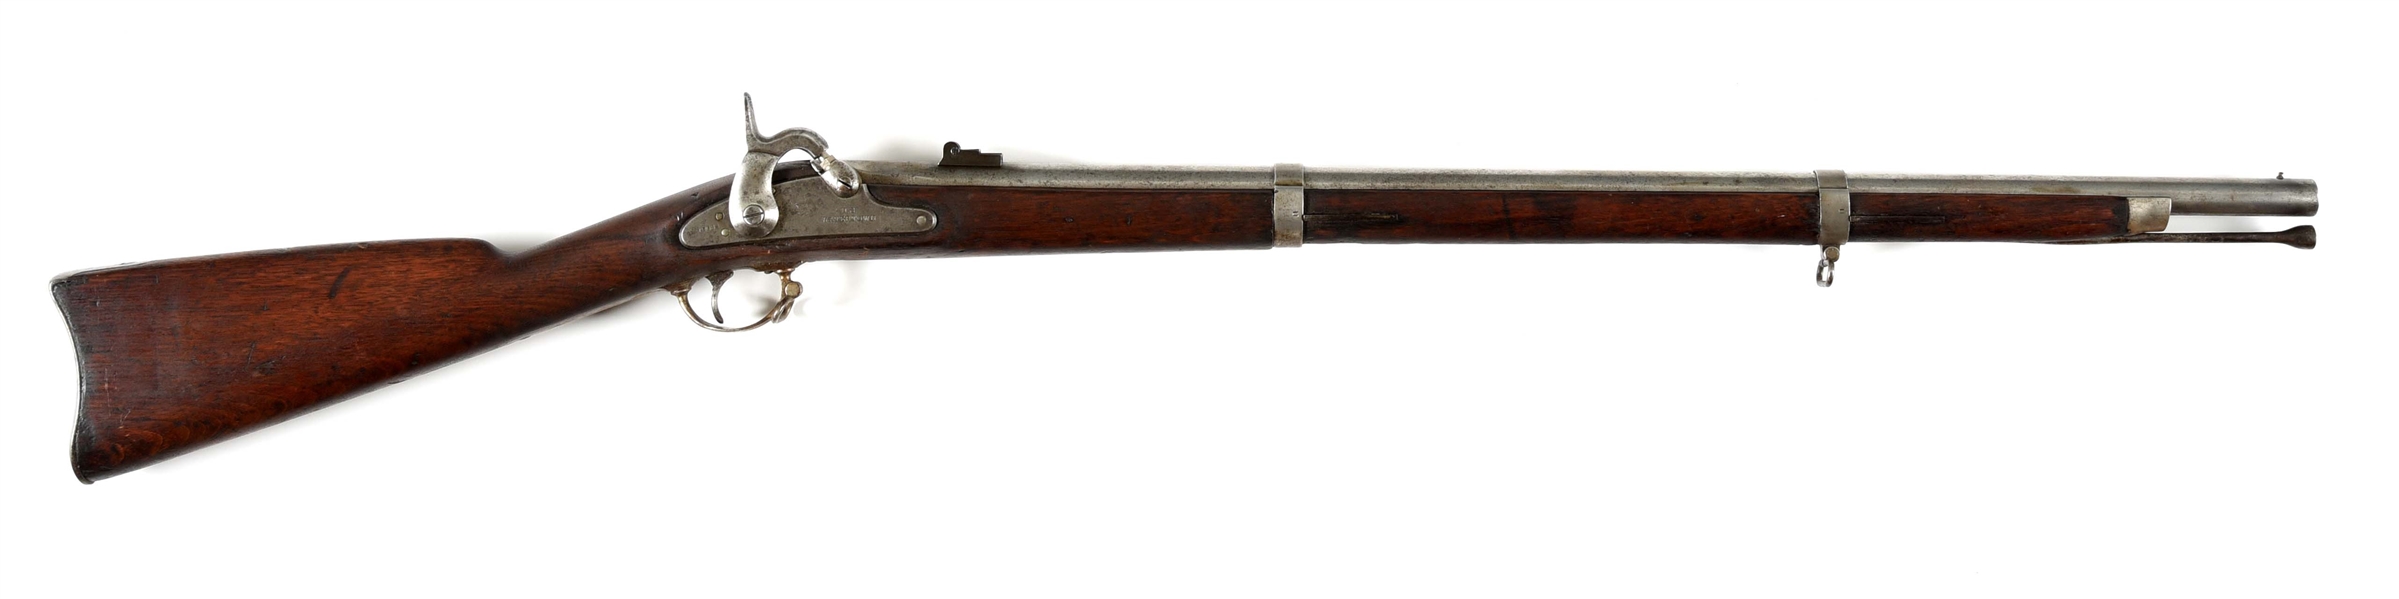 (A) WATERTOWN MODEL 1861 CONTRACT PERCUSSION MUSKET.